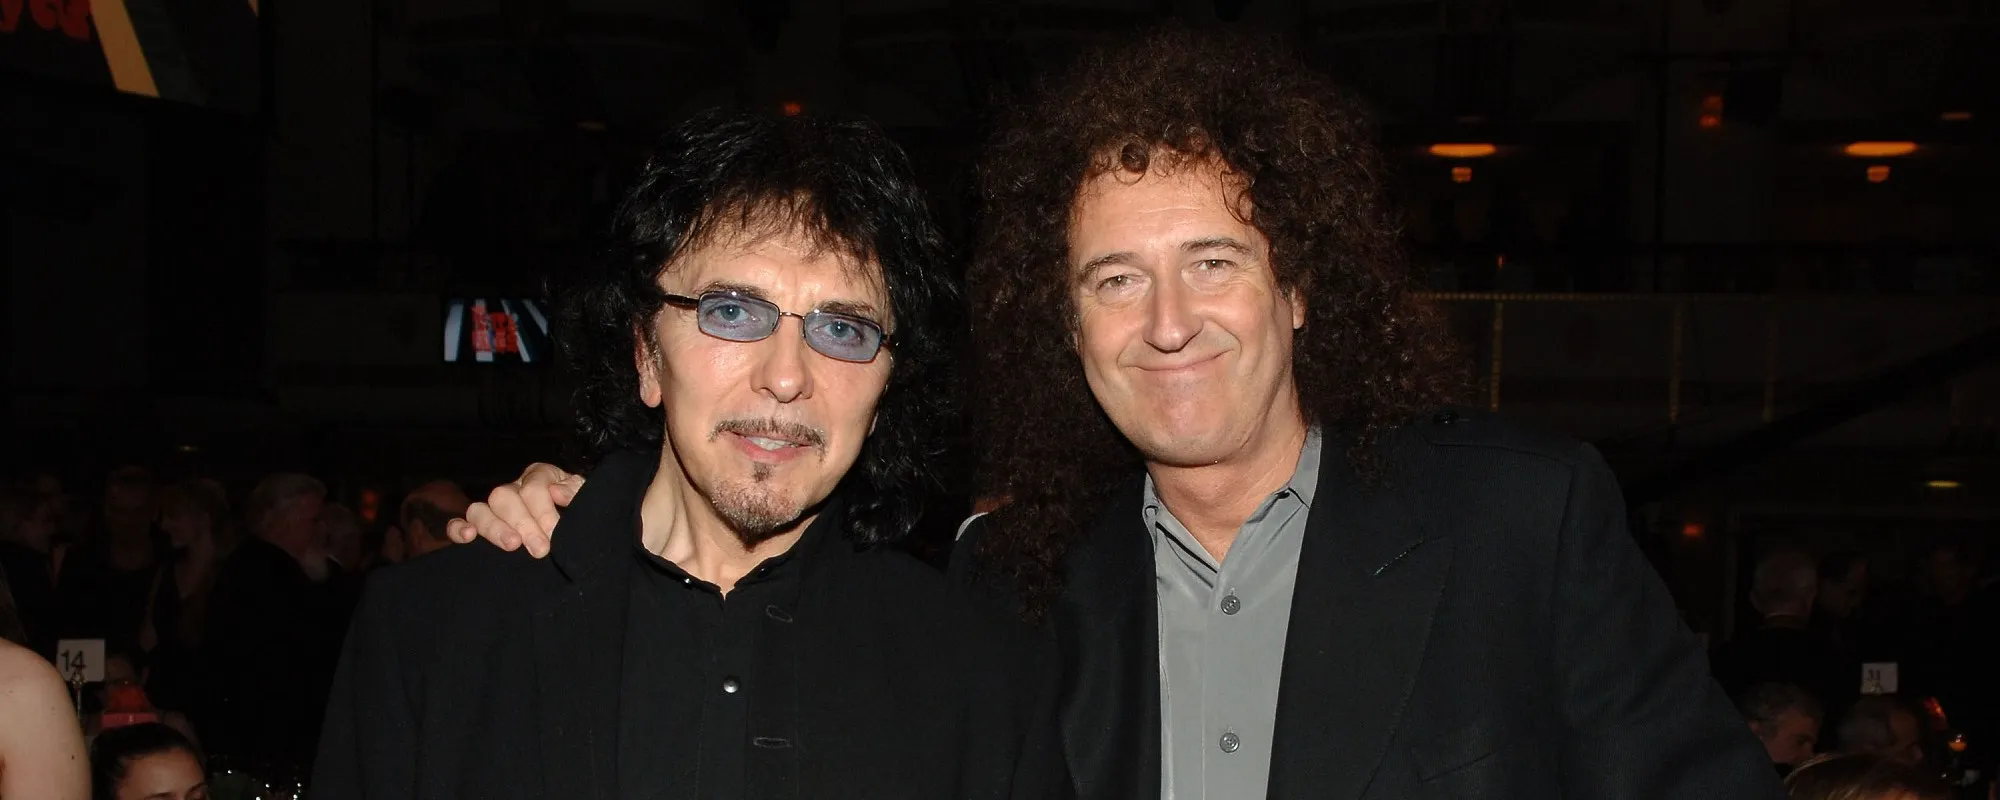 Watch Black Sabbath’s Tony Iommi Jam with Queen’s Brian May on the Classic Sabbath Tune “Paranoid”